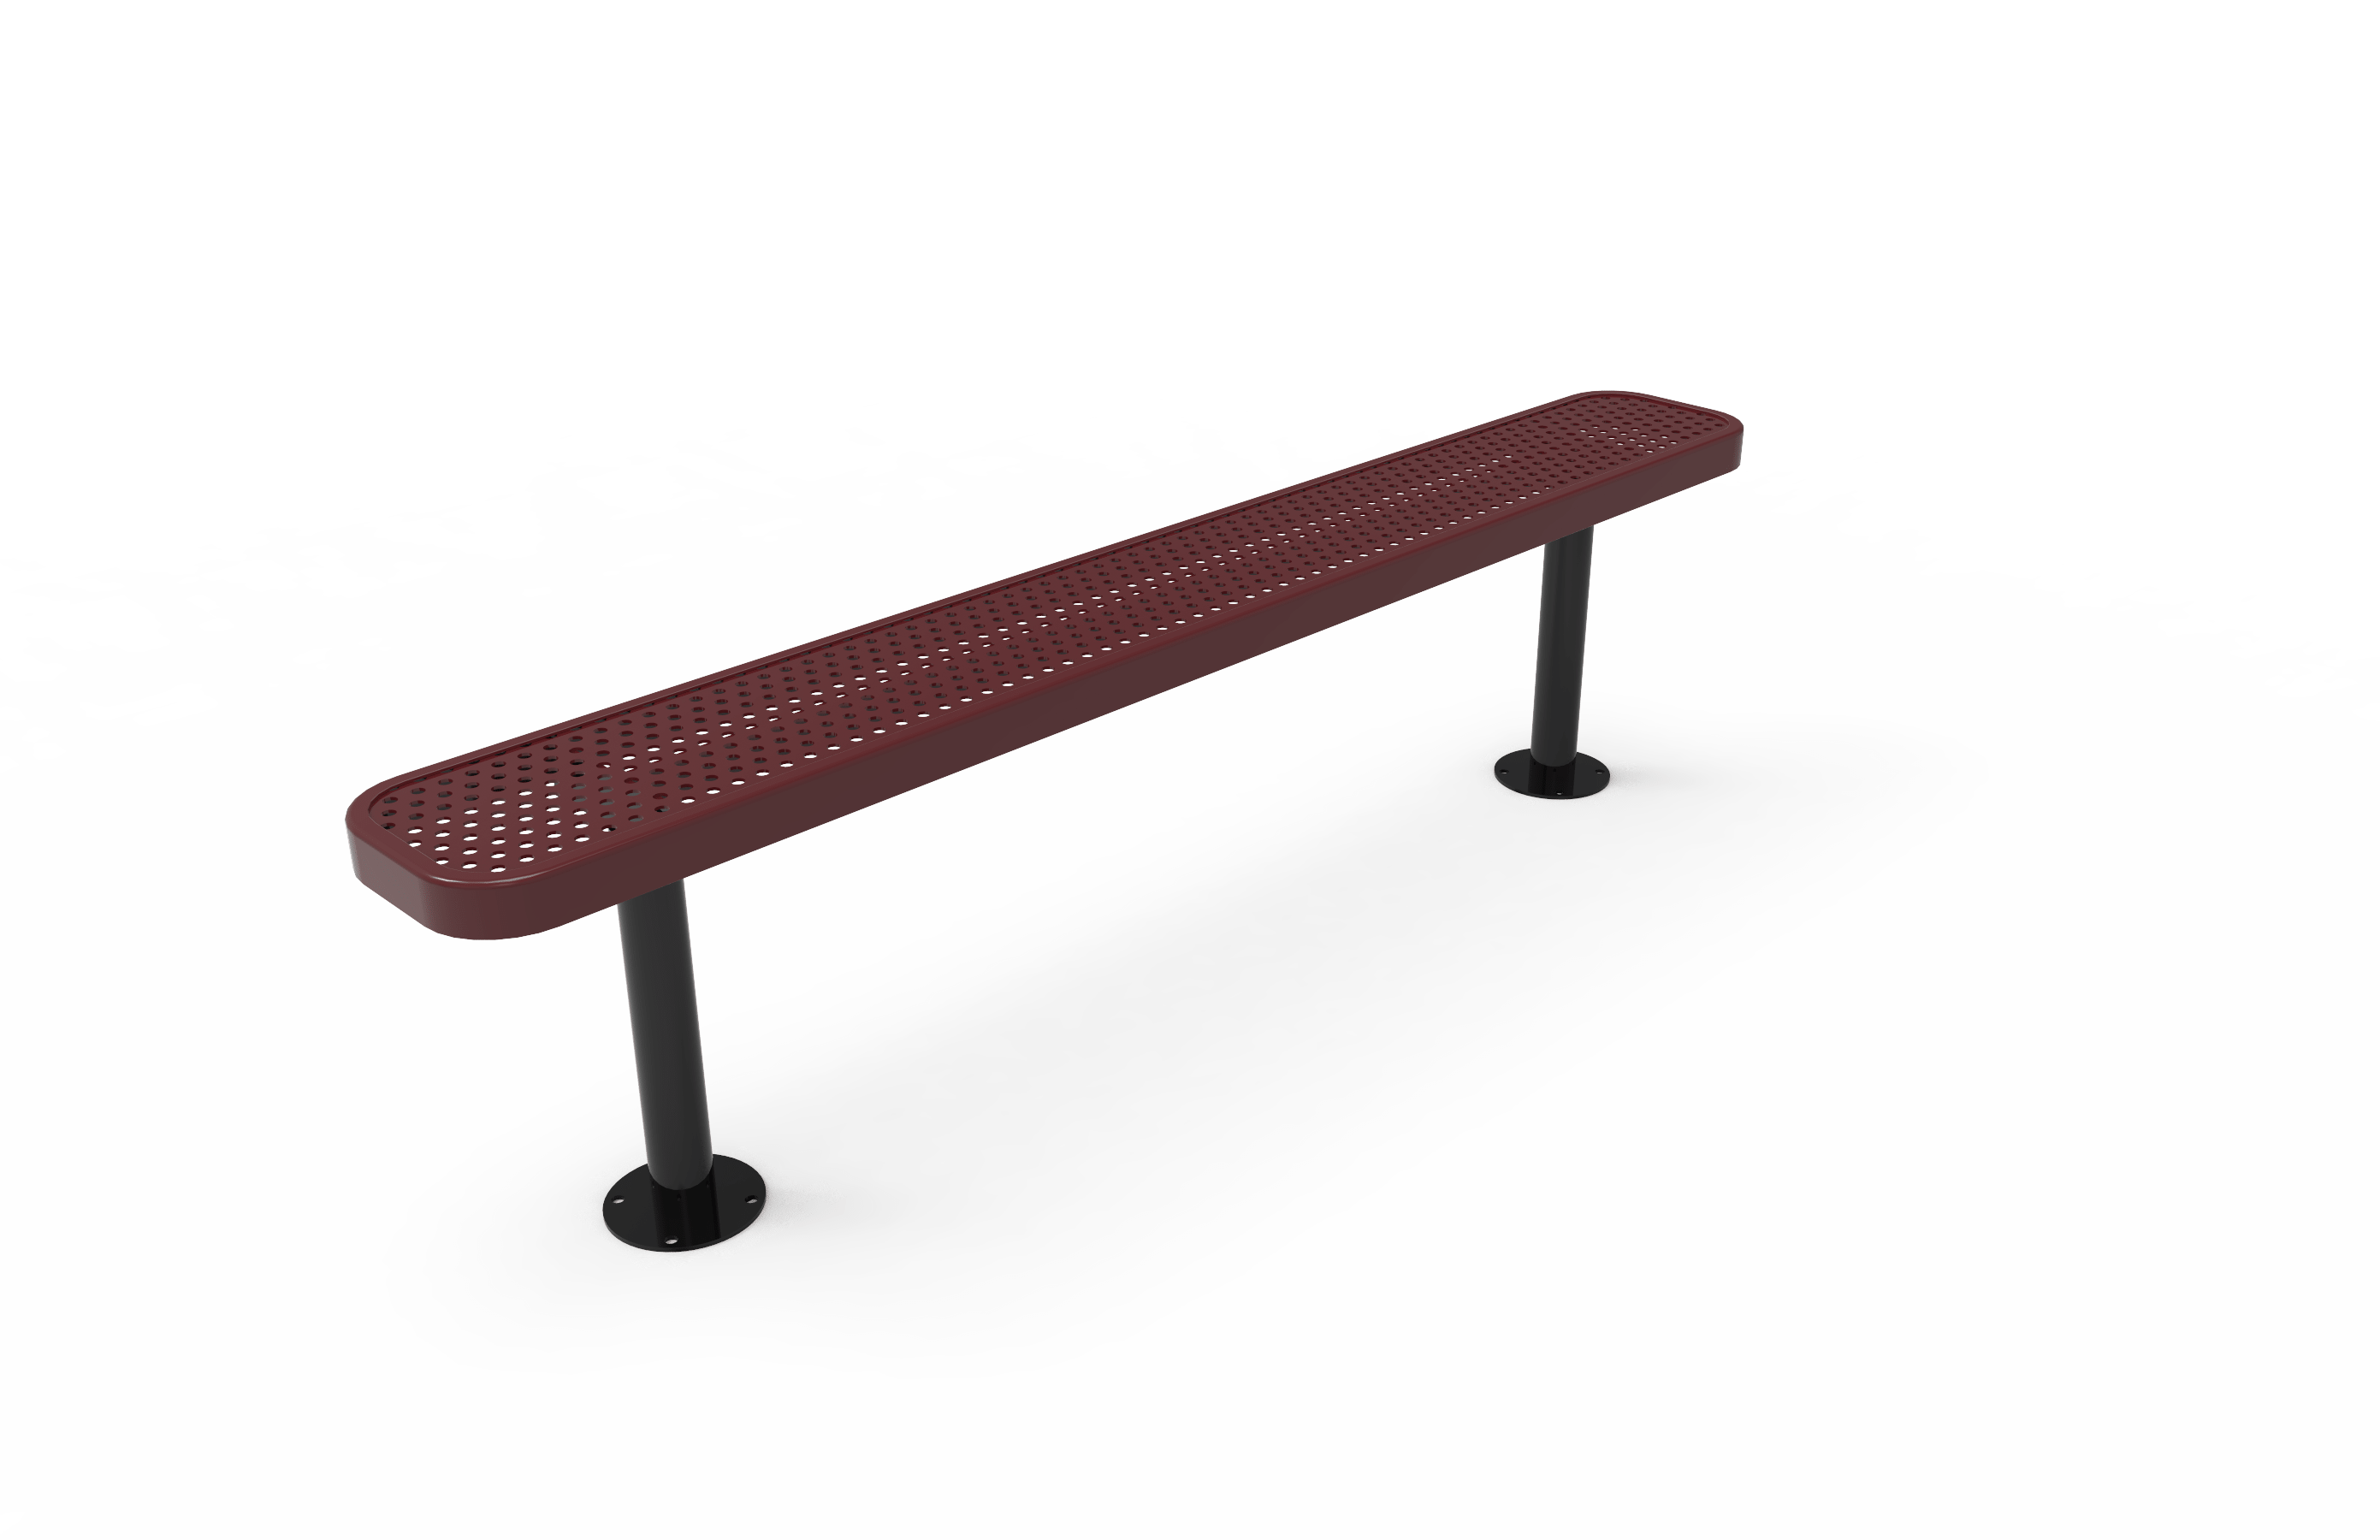 6′ Standard Bench Without Back-Punched
BRT06-D-23-000
Industry Standard Finish
$369.00
BRT06-B-23-000
Advantage Premium Finish
$449.00
